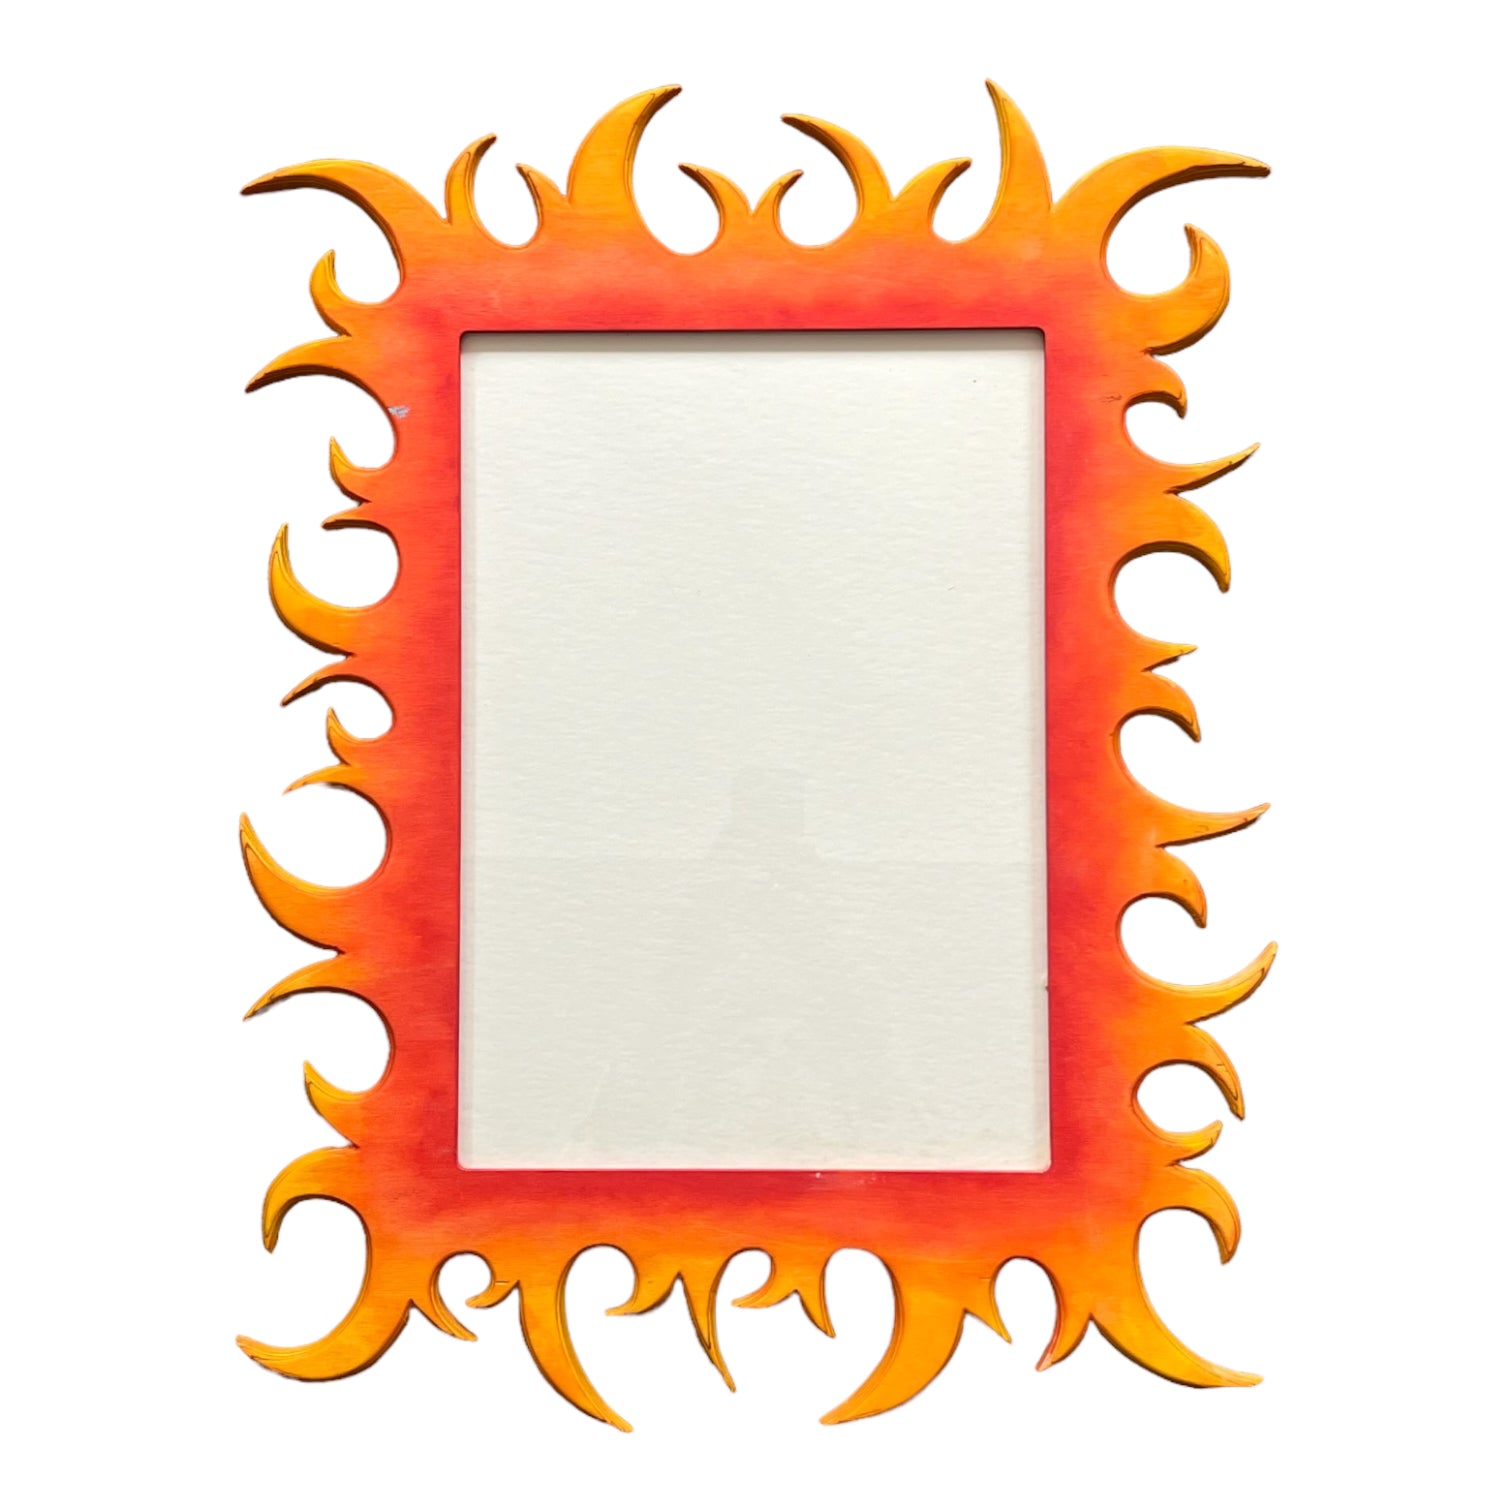 FIRE FRAME BY RALPH PARKS